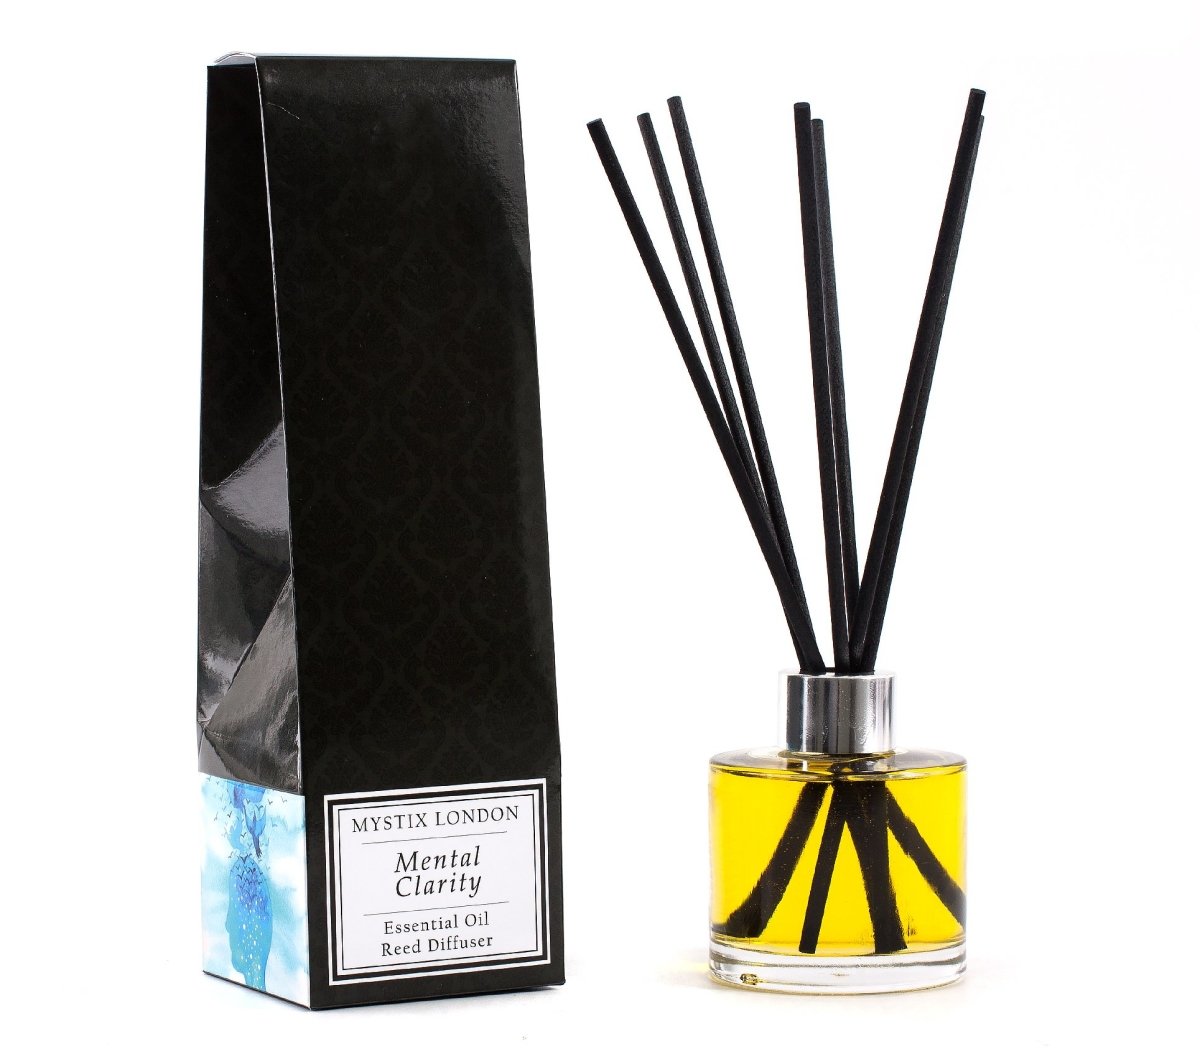 Mental Clarity - Essential Oil Reed Diffuser - Mystic Moments UK